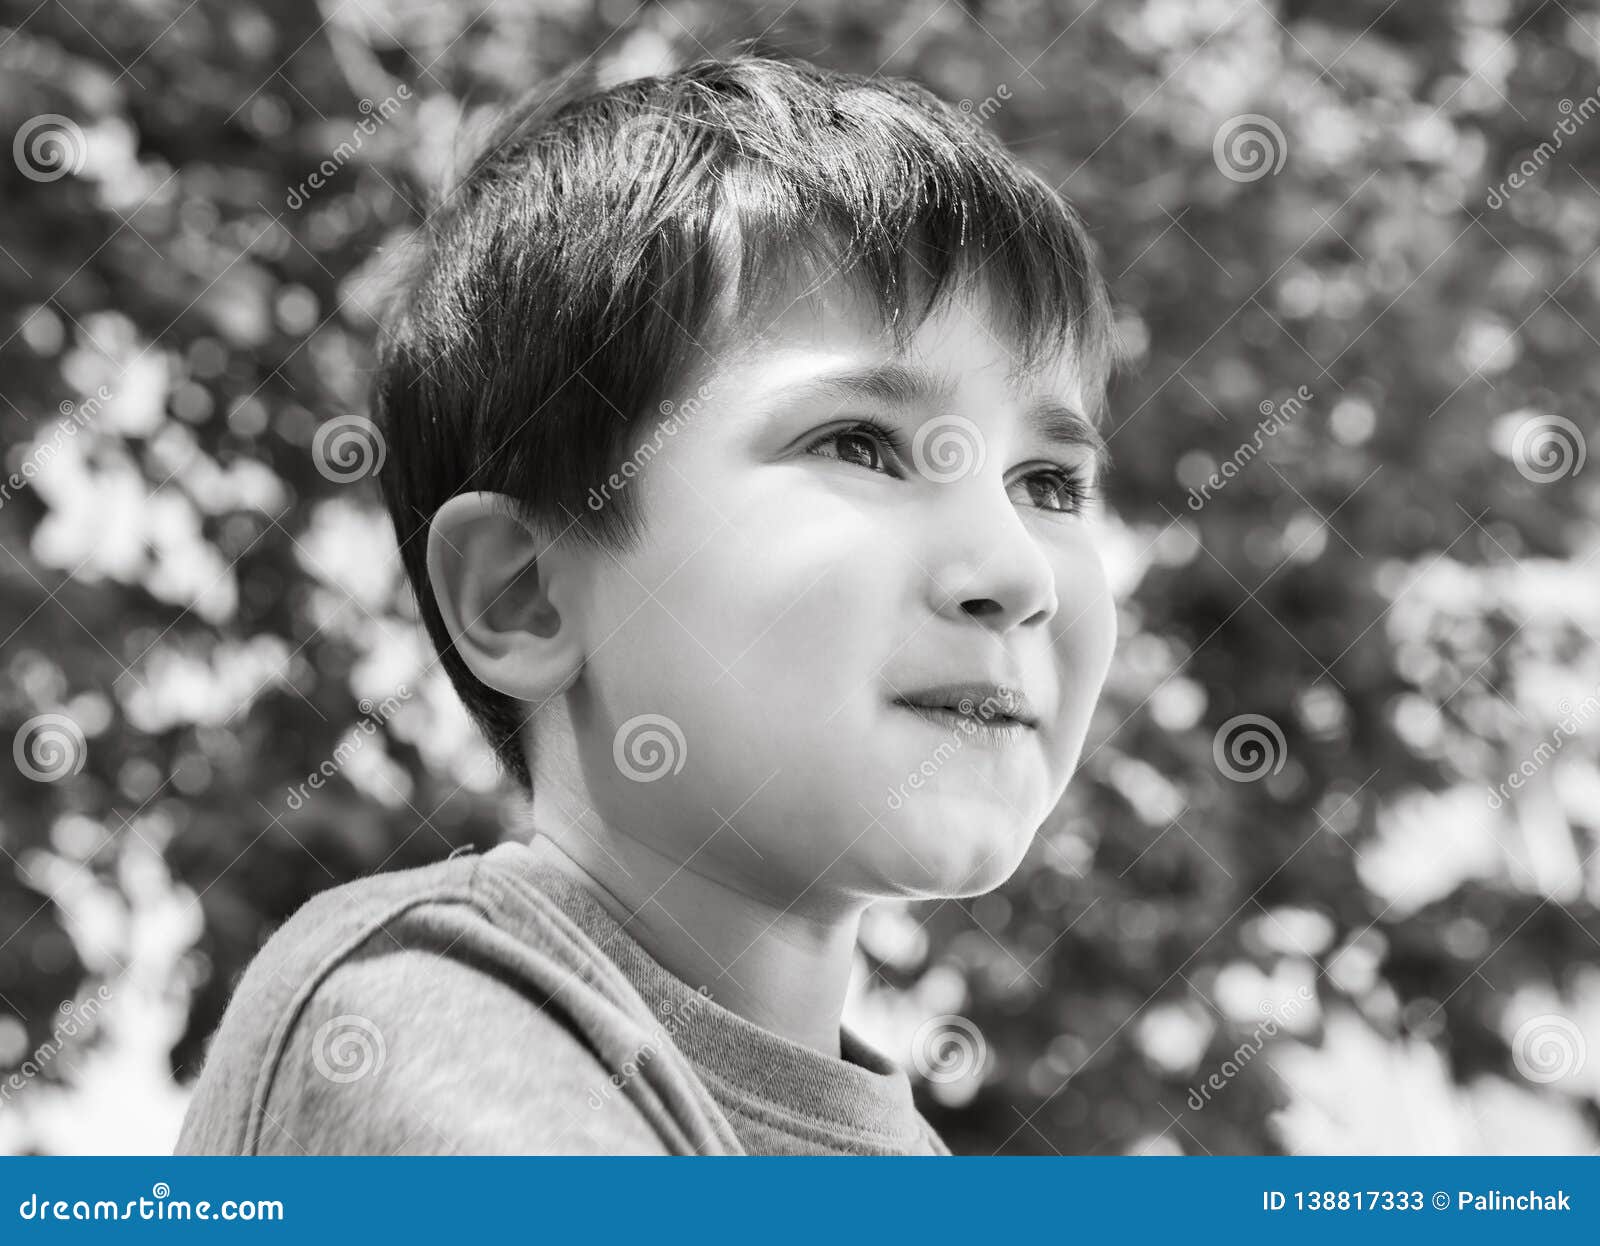 Portrait of a little boy stock image. Image of eyes - 138817333